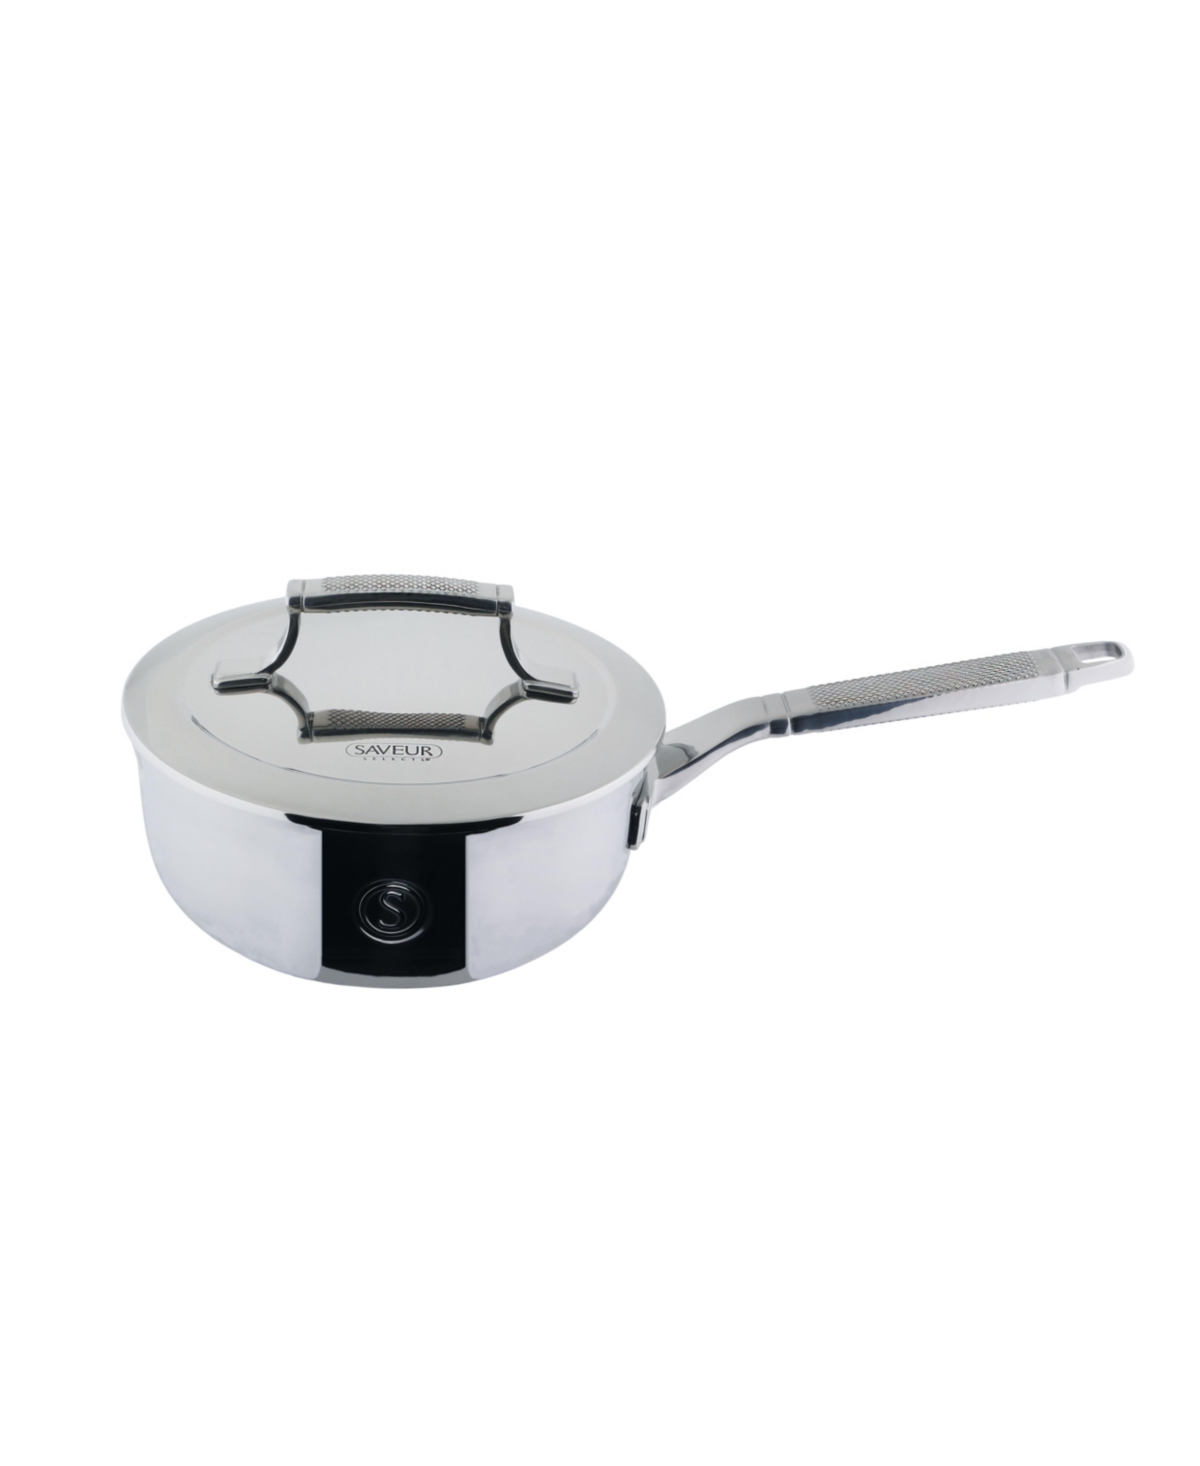 Saveur Selects Voyage Series Tri-ply Stainless Steel 2-qt. Chef's Pan With Lid In Silver